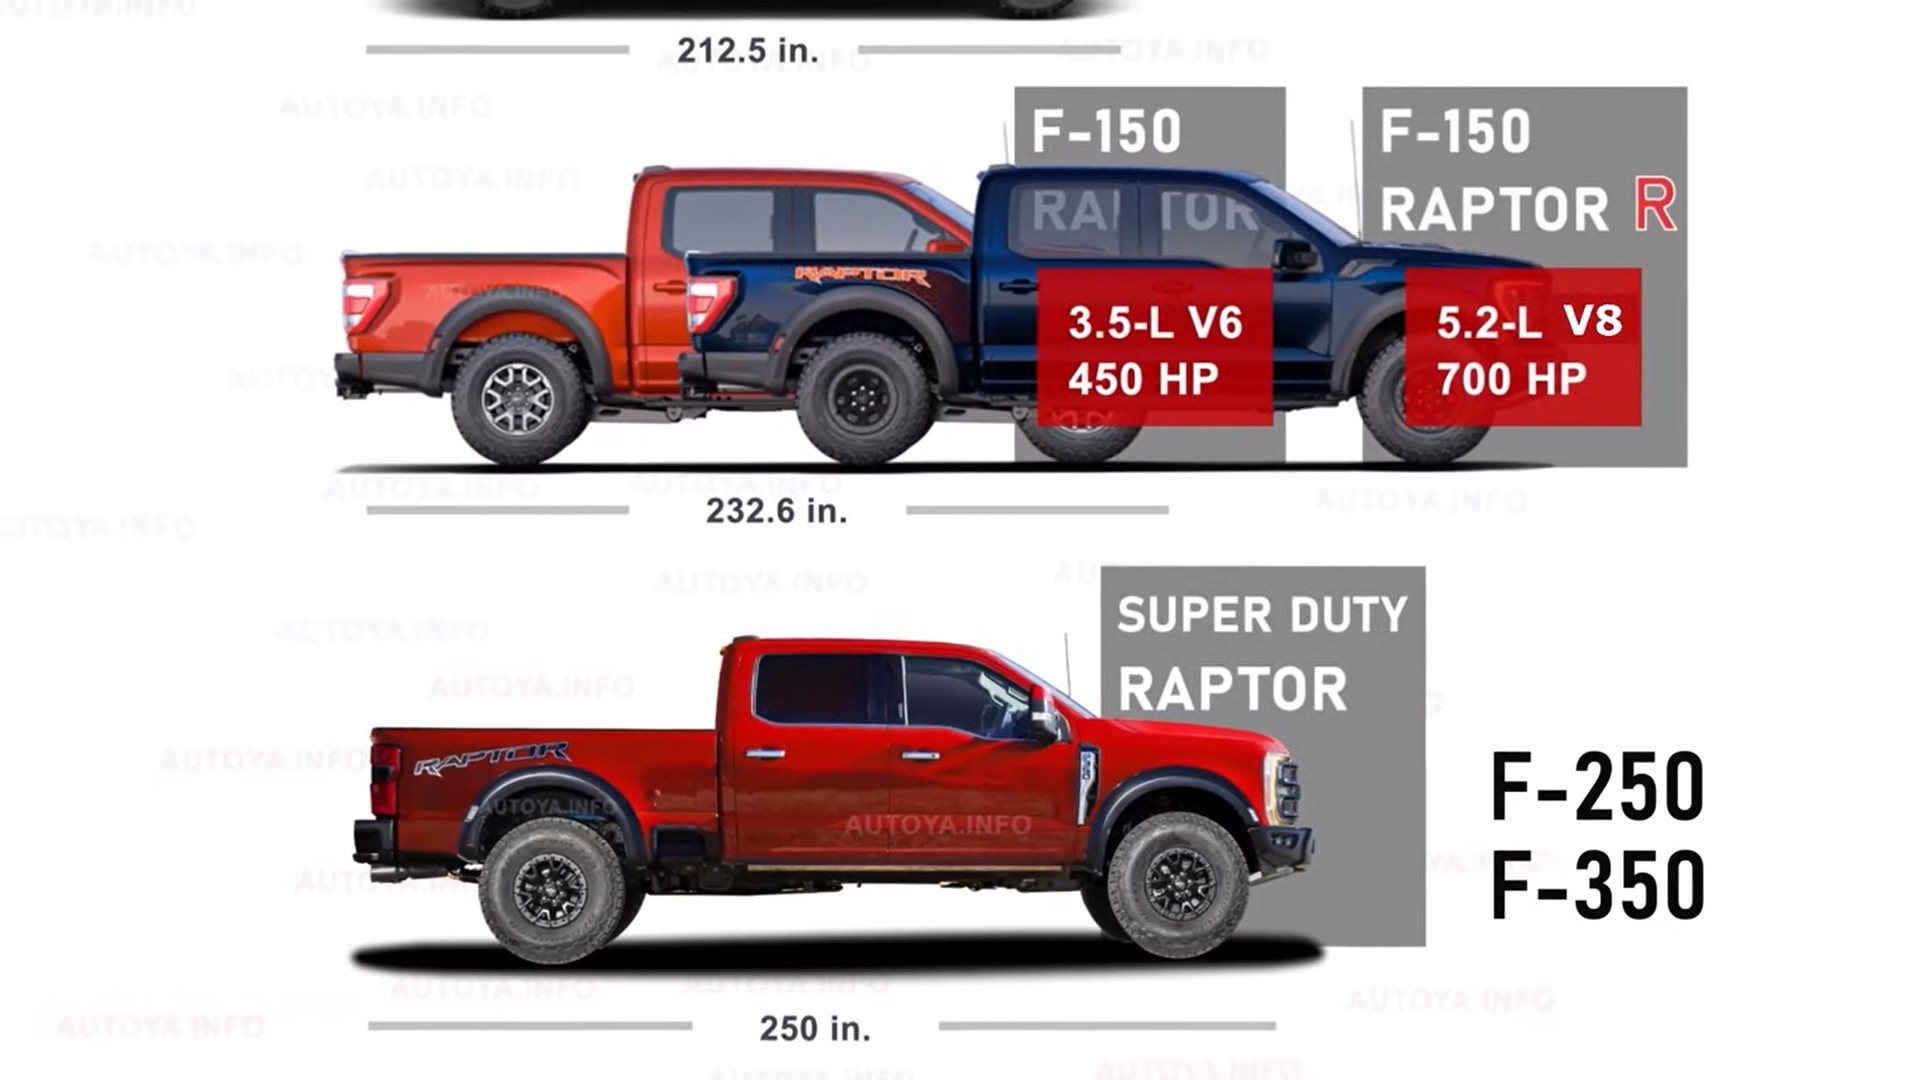 2024 Ford Super Duty Raptor R Digitally Towers Above the HeavyDuty Truck Pack autoevolution